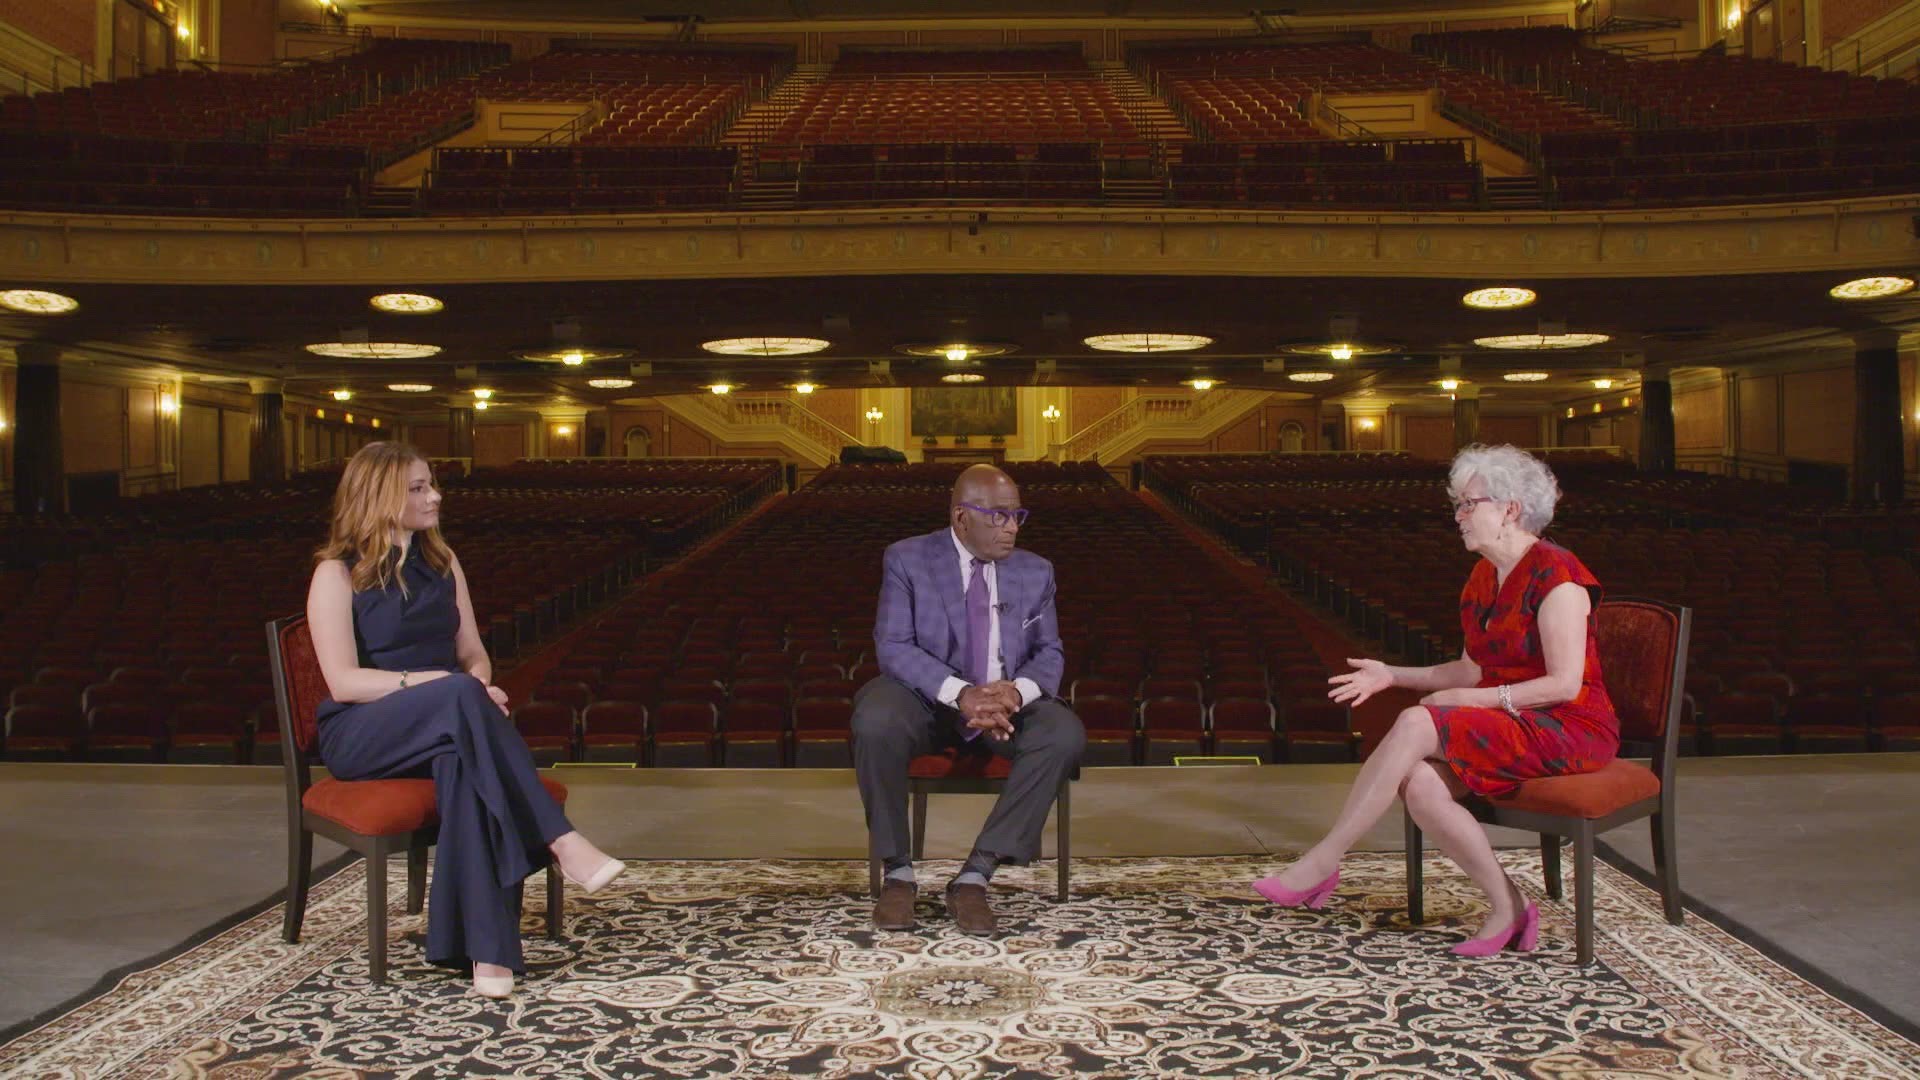 Here's an extended report from Al Roker and Maureen Kyle as they explore the future of Cleveland's theater scene from Playhouse Square to Karamu House.